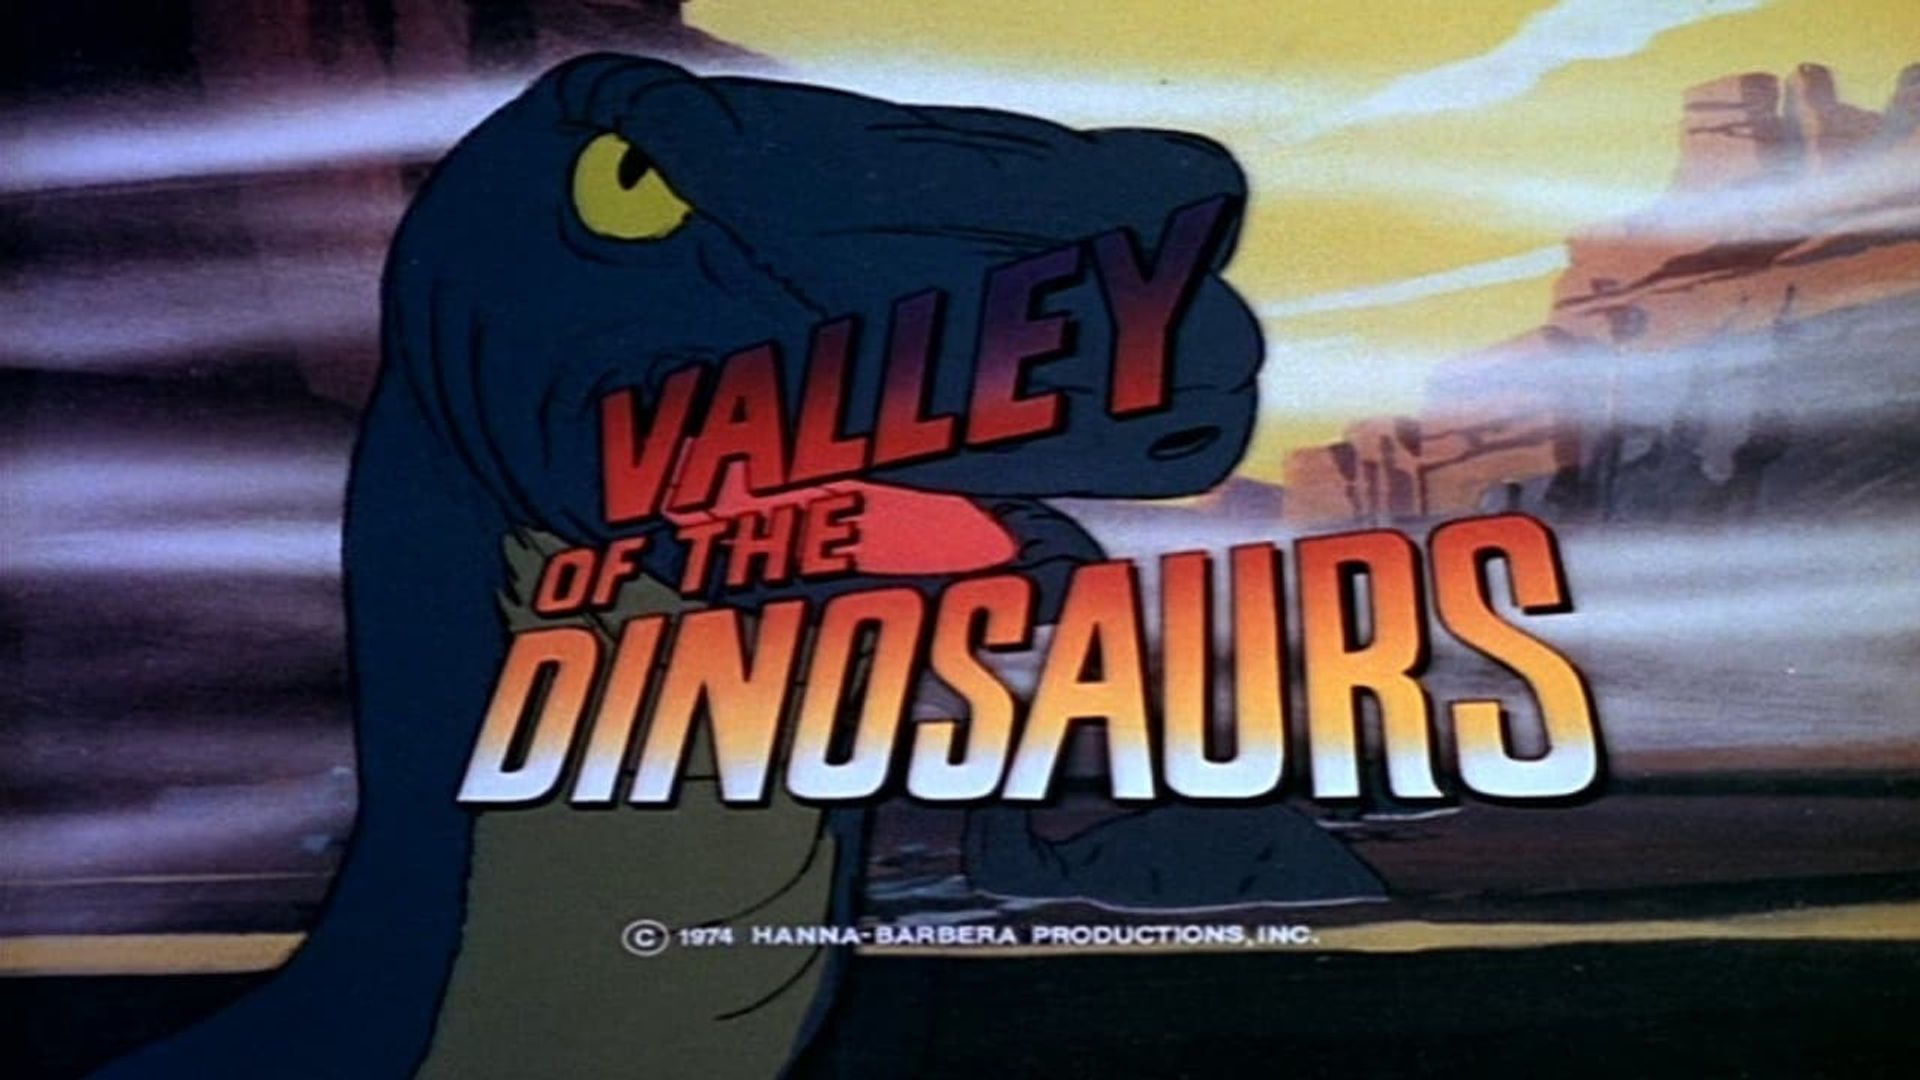 Valley of the Dinosaurs background